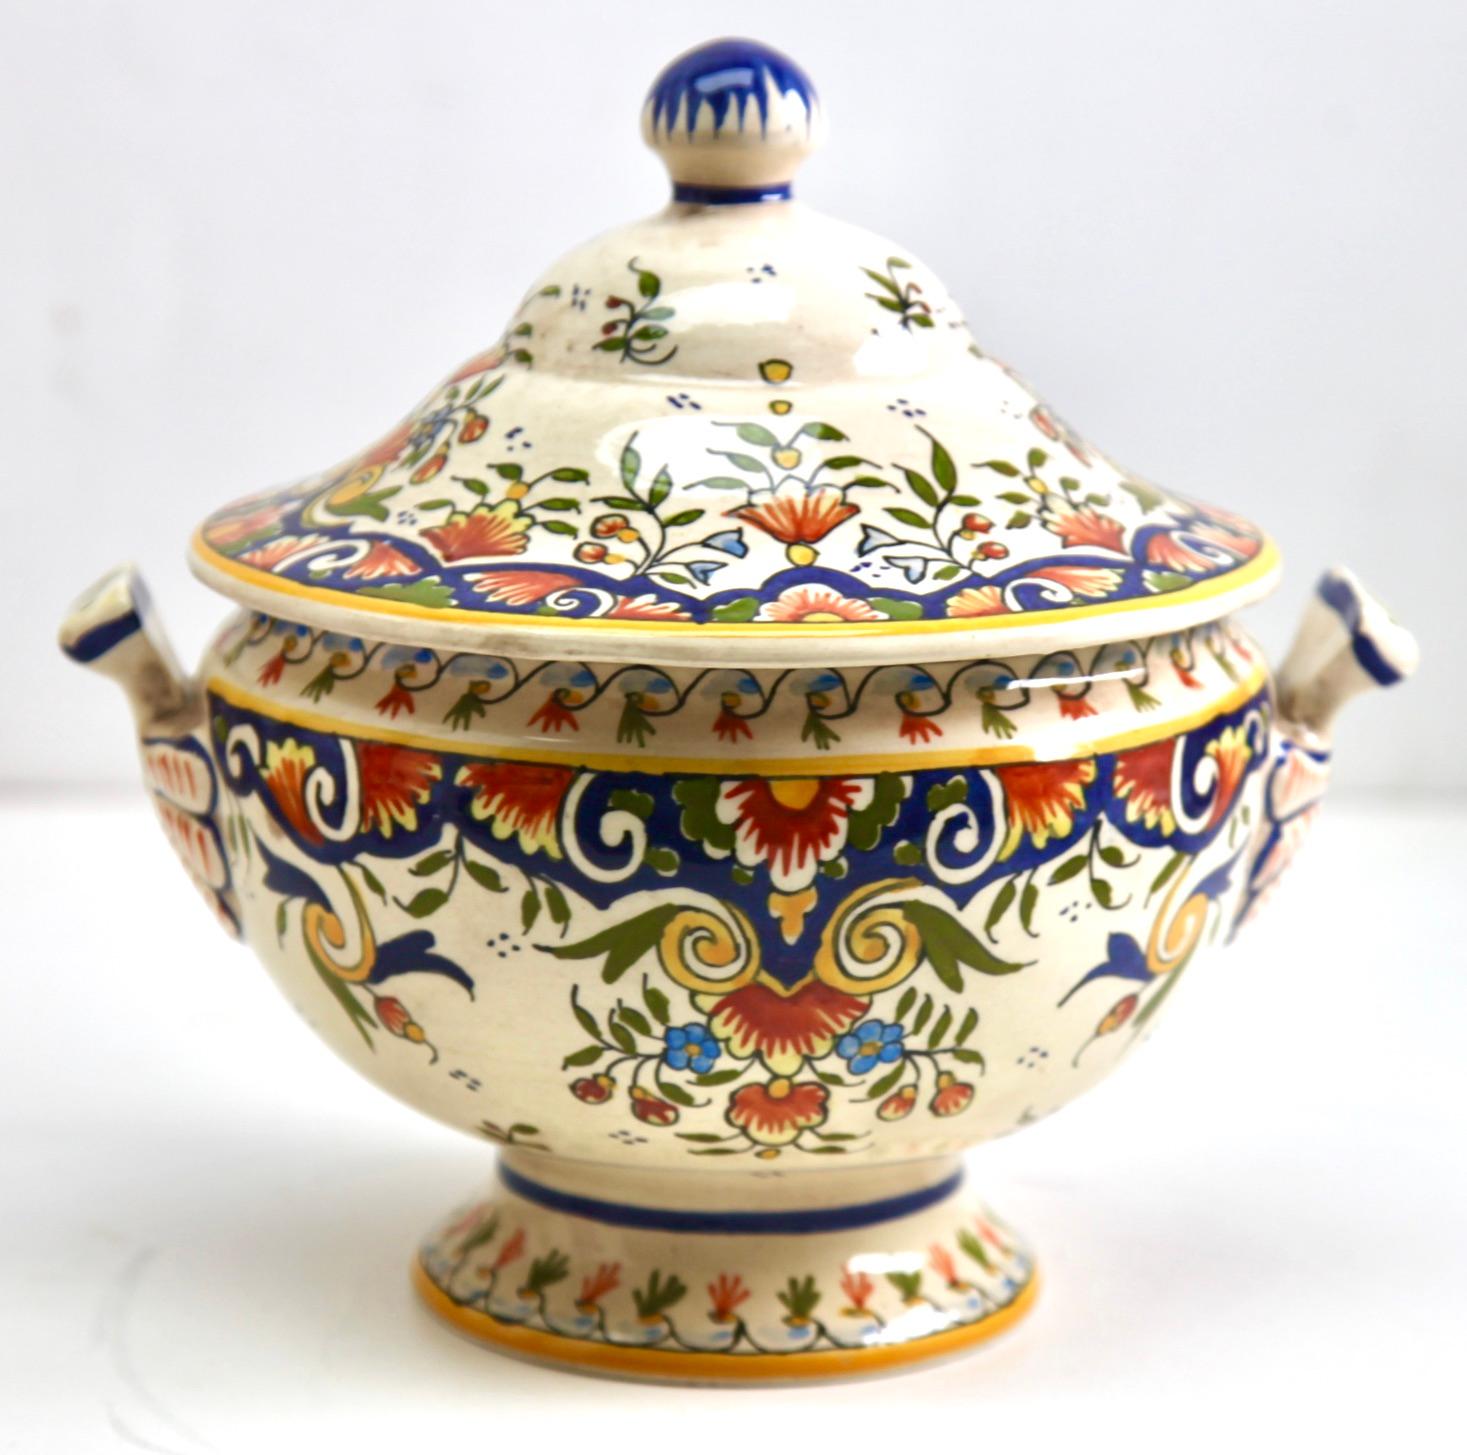 The designs on this French faience group is typical of pottery made in Rouen. 
Early 20th century French hand-painted Faience Terrine from Rouen.
Marking on the bottom: 